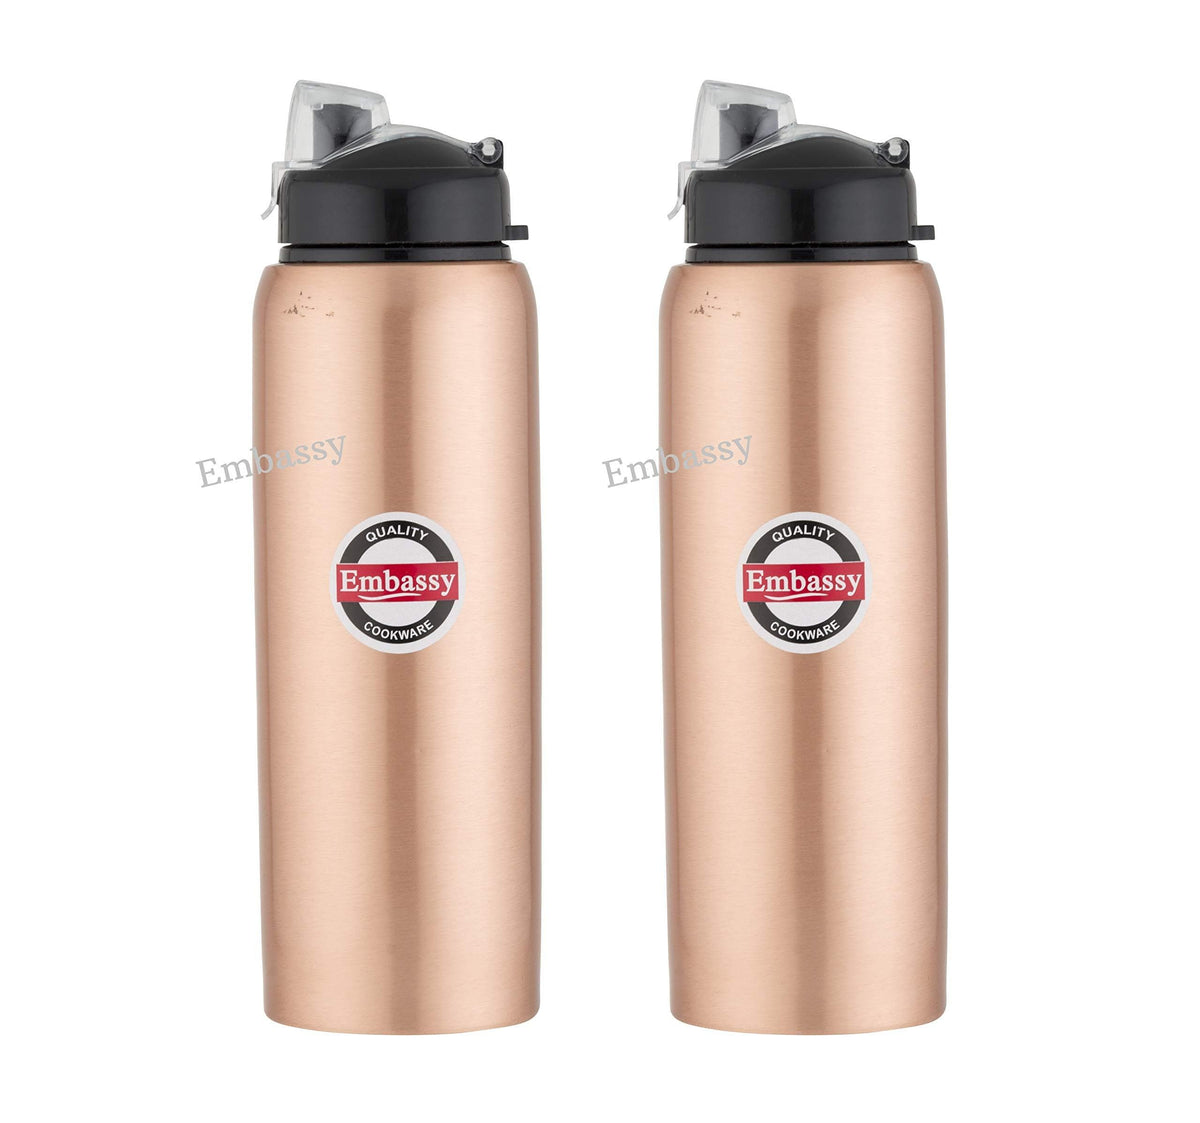 Embassy Premium Copper Water Bottle, Sipper, 600 ml, Pack of 2 - Leak-Proof, Jointless and Pure Copper - KITCHEN MART